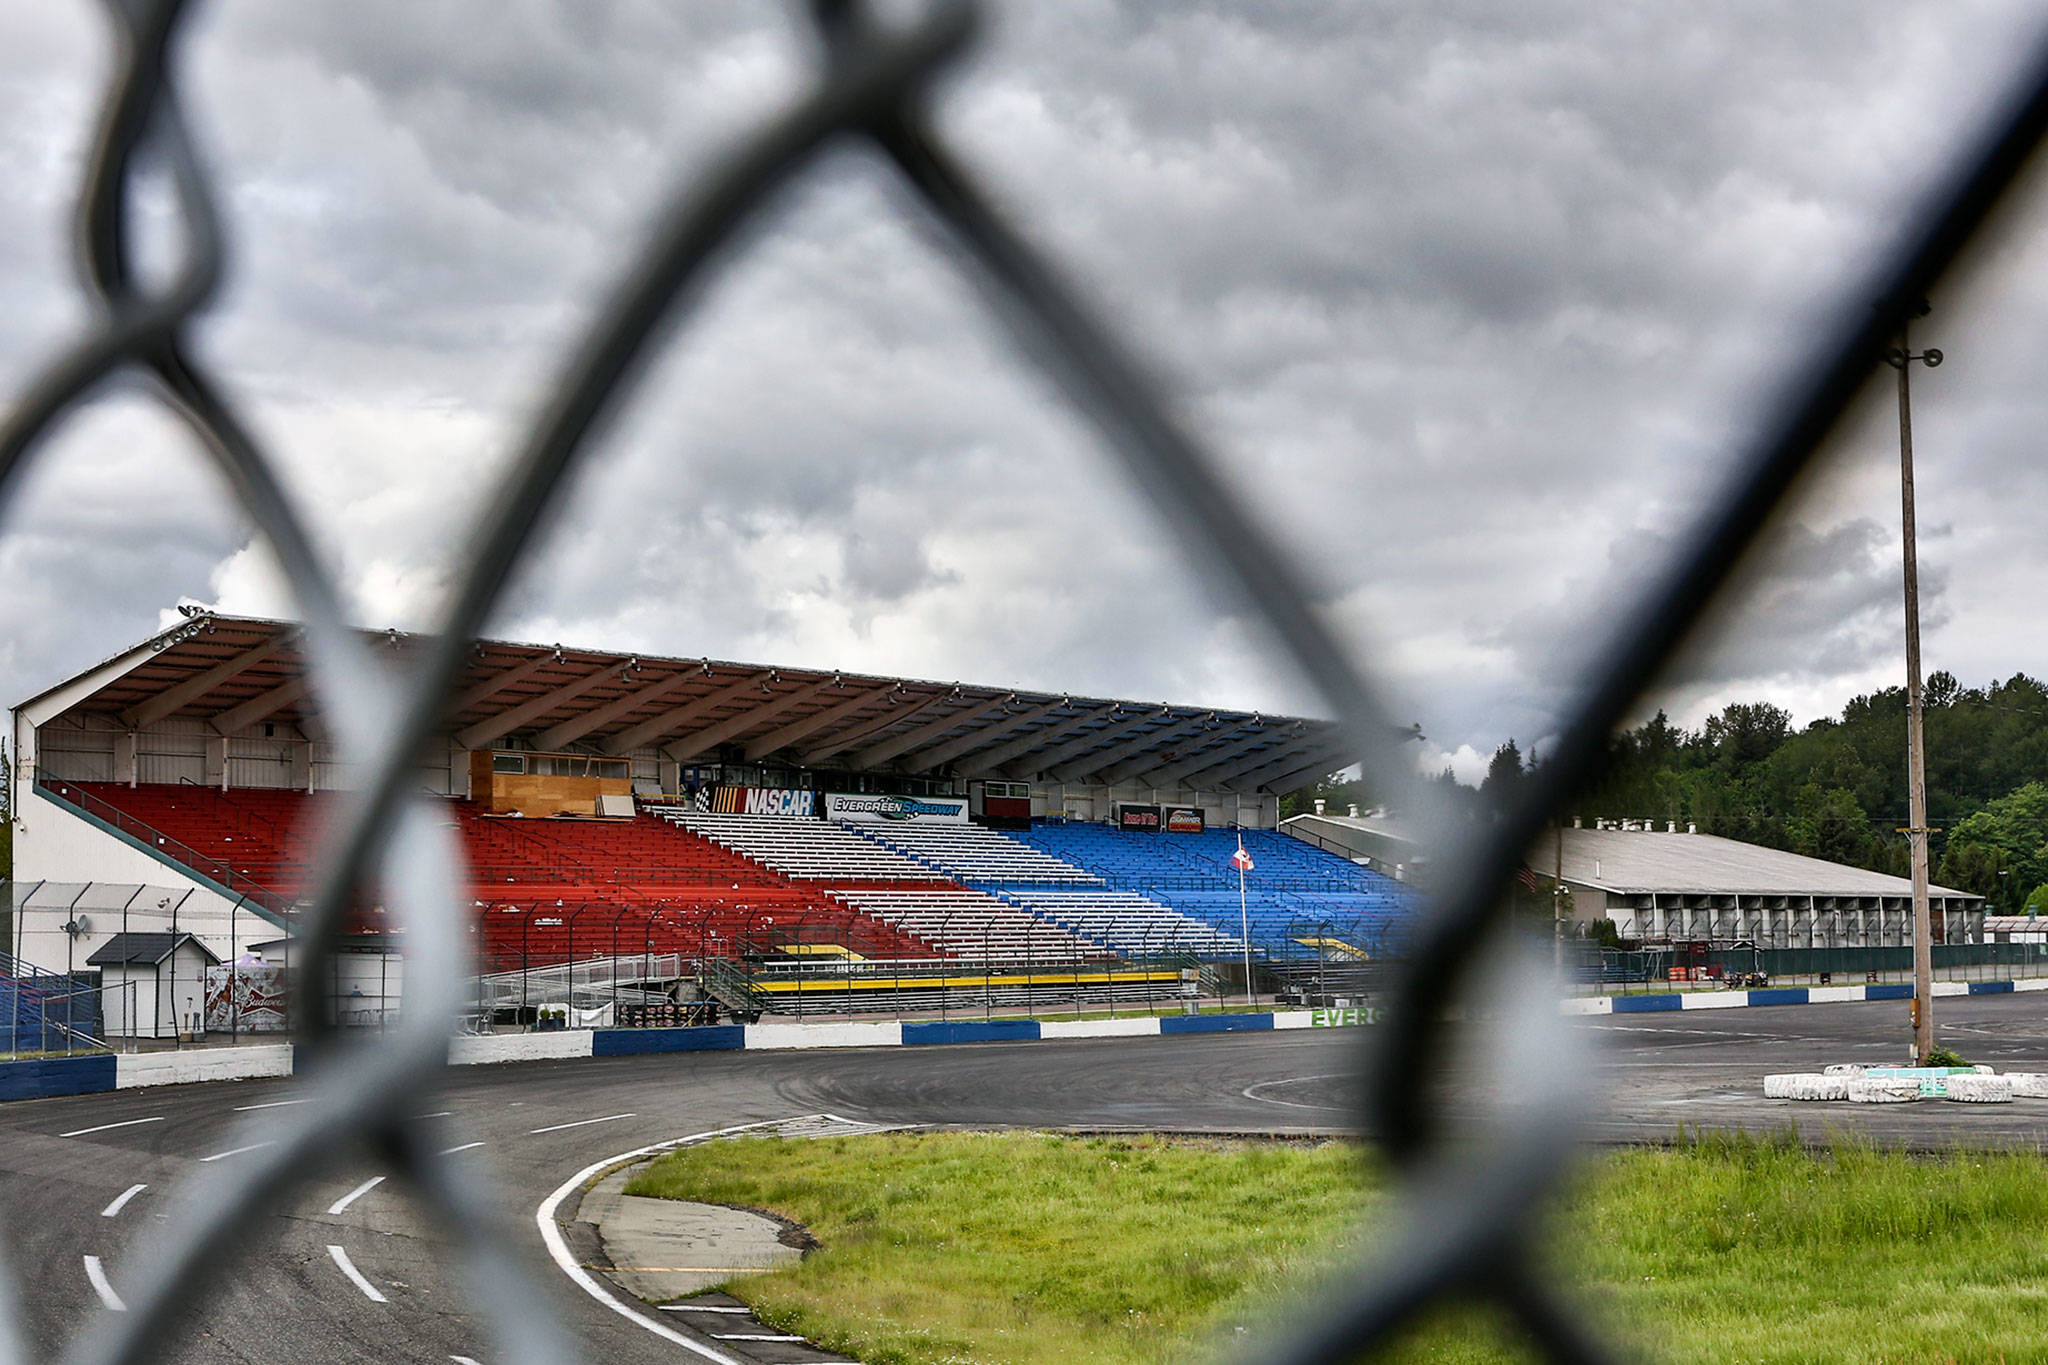 Evergreen Speedway remains closed due the stay-at-home order while NASCAR will run its first race Sunday since the pandemic began. (Kevin Clark / The Herald)